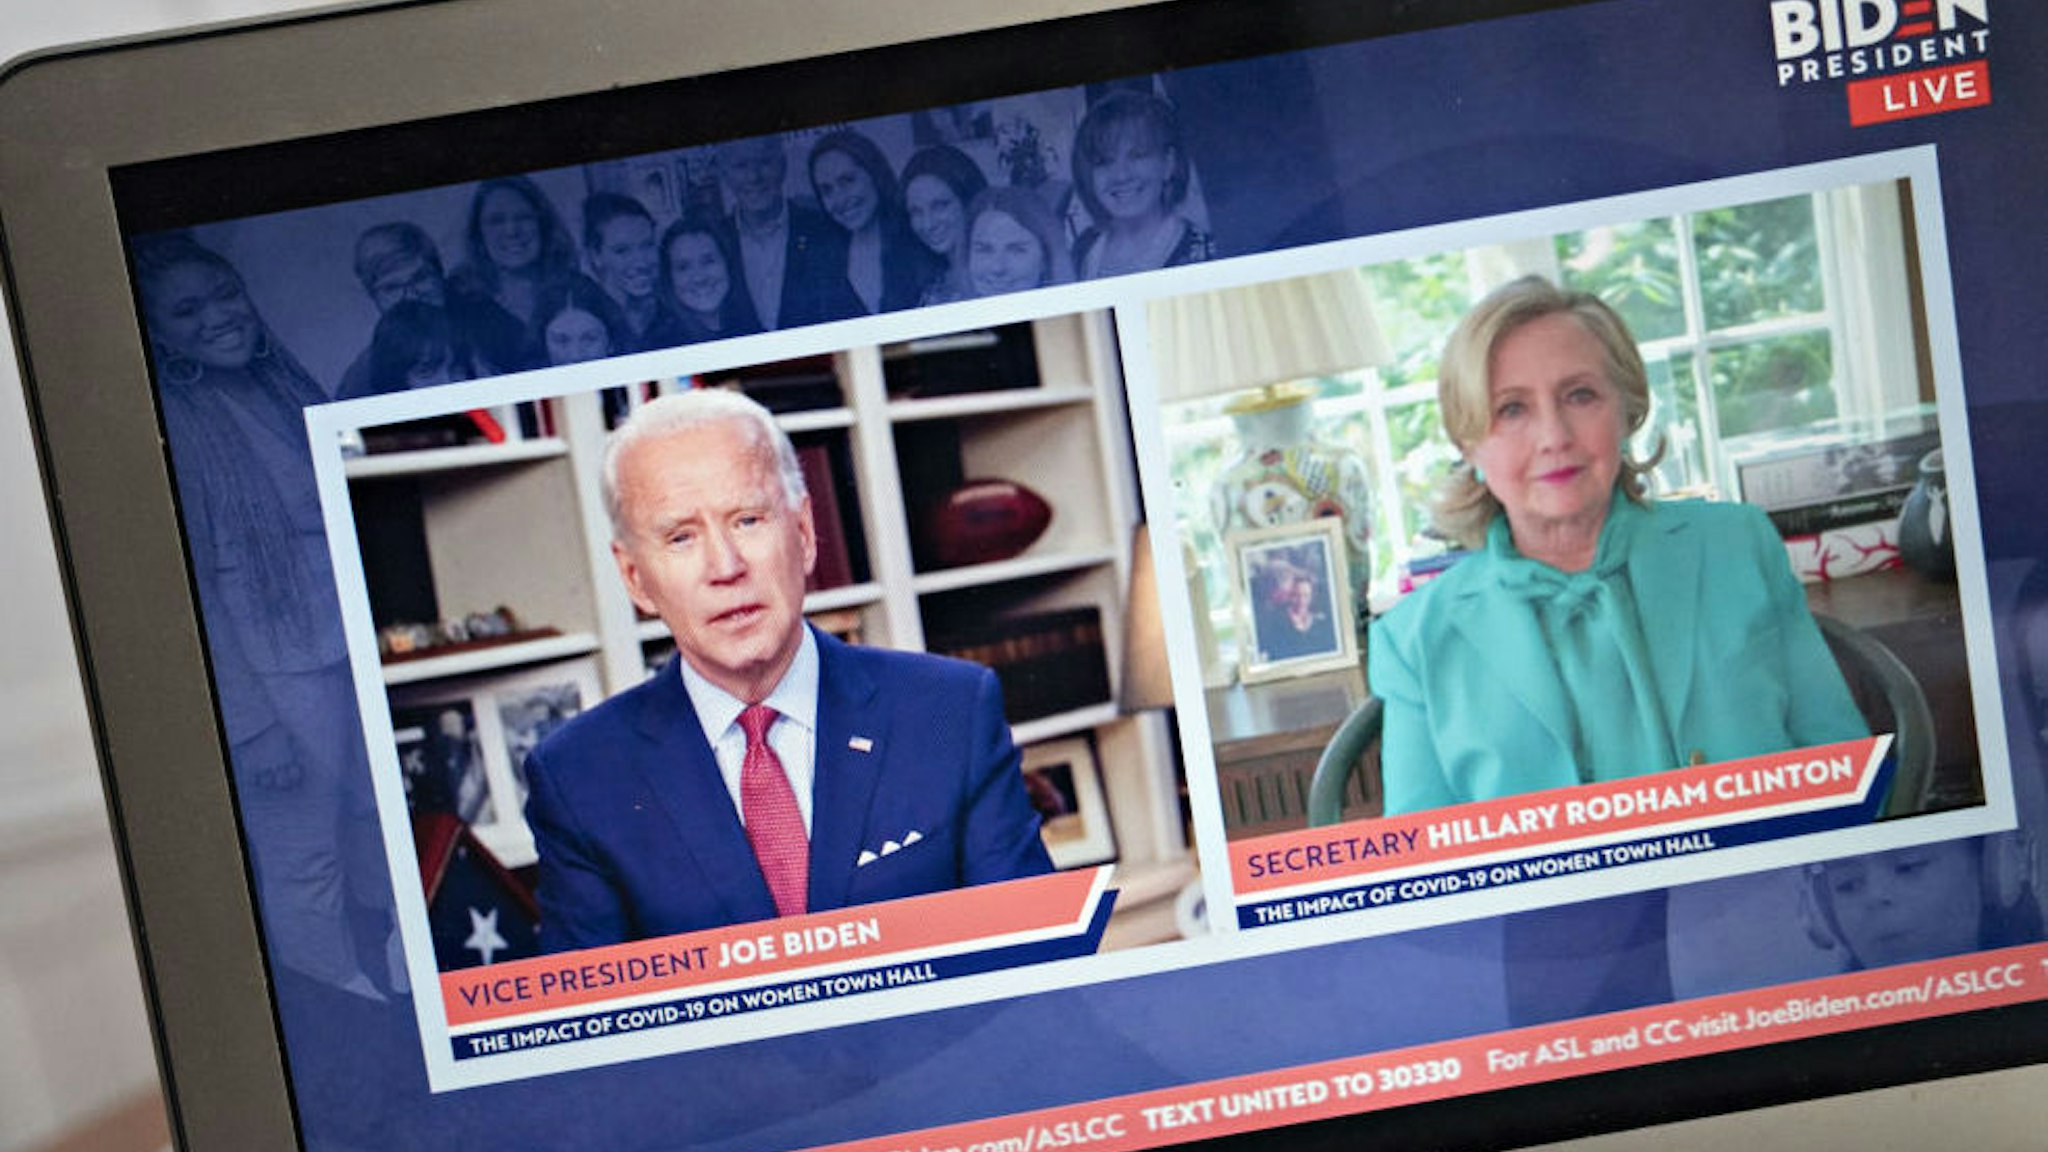 Former Vice President Joe Biden, presumptive Democratic presidential nominee, left, speaks as Hillary Clinton, former U.S. secretary of state, listens during a virtual event seen on a laptop computer in Arlington, Virginia, U.S., on Tuesday, April 28, 2020. Clinton endorsed Biden today saying that she wishes he were in the White House to lead the country through the coronavirus pandemic. Photographer: Andrew Harrer/Bloomberg